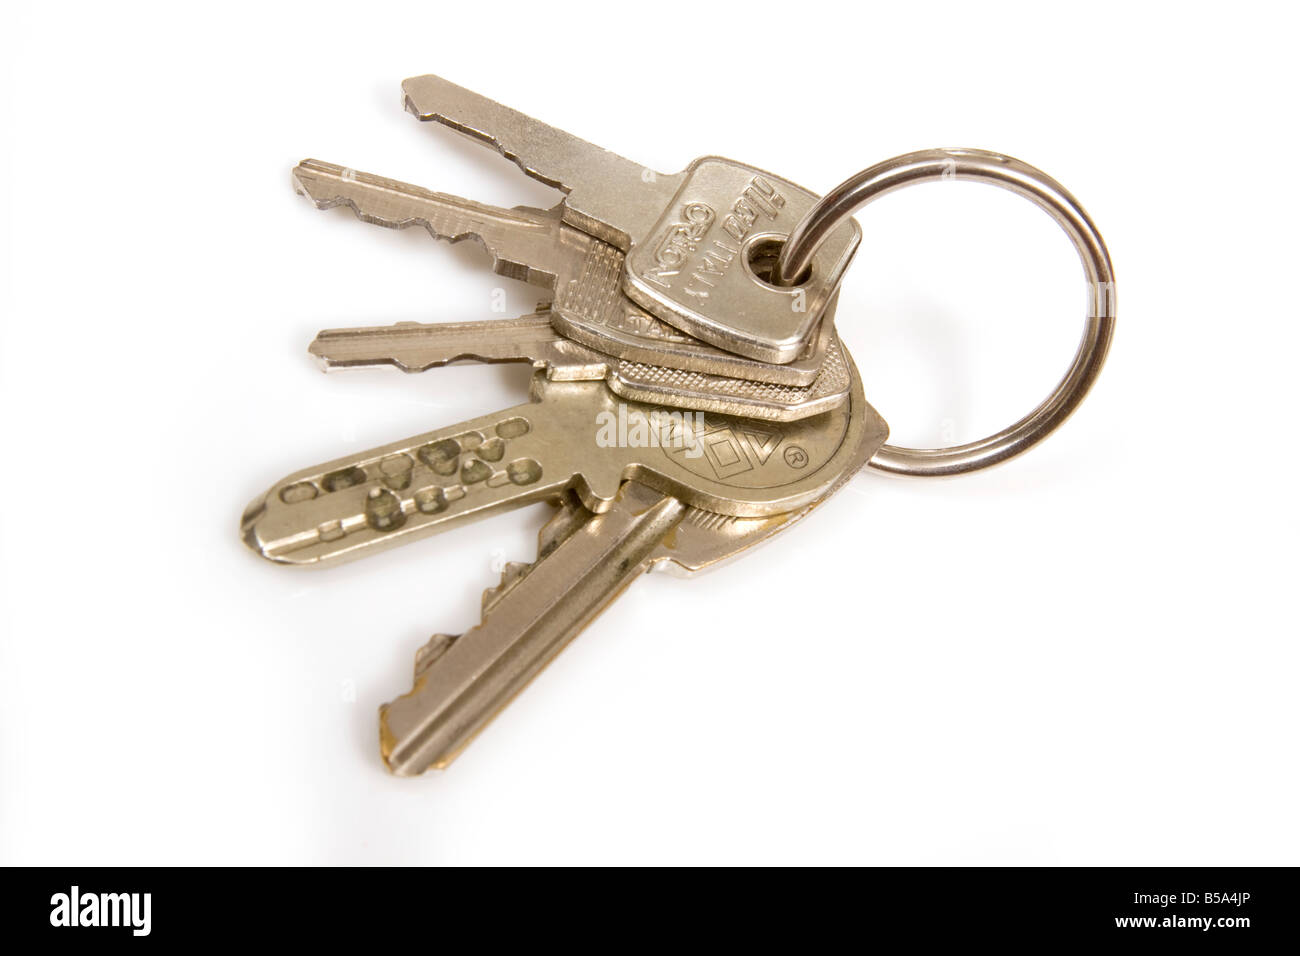 Bunch of house keys isolated on a white studio background Stock Photo